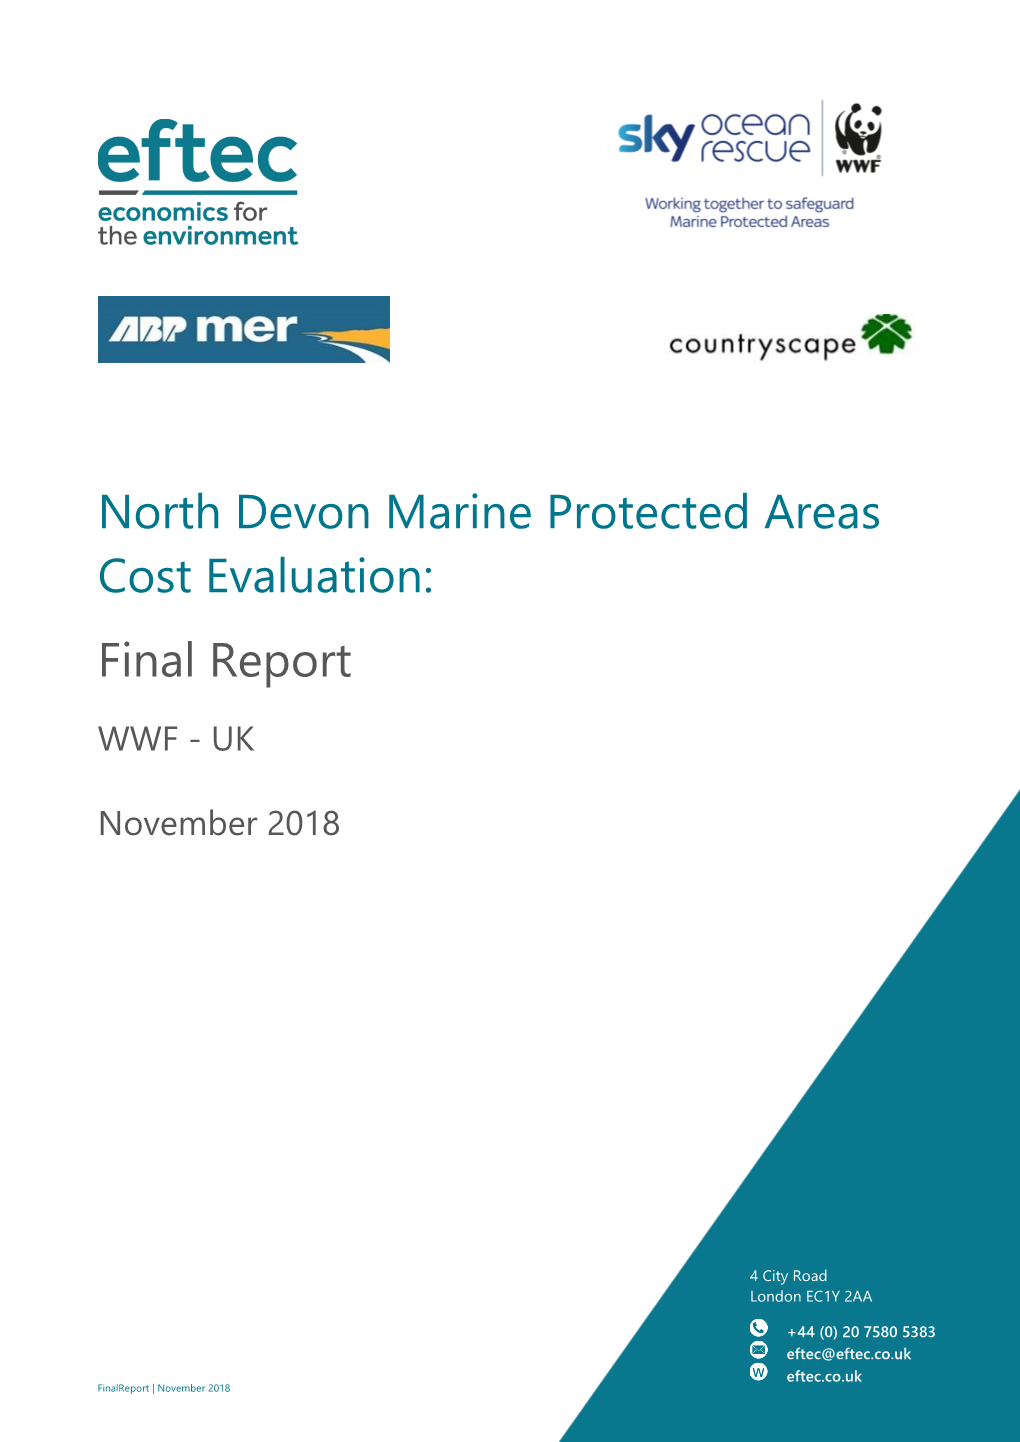 North Devon Marine Protected Areas Cost Evaluation: Final Report